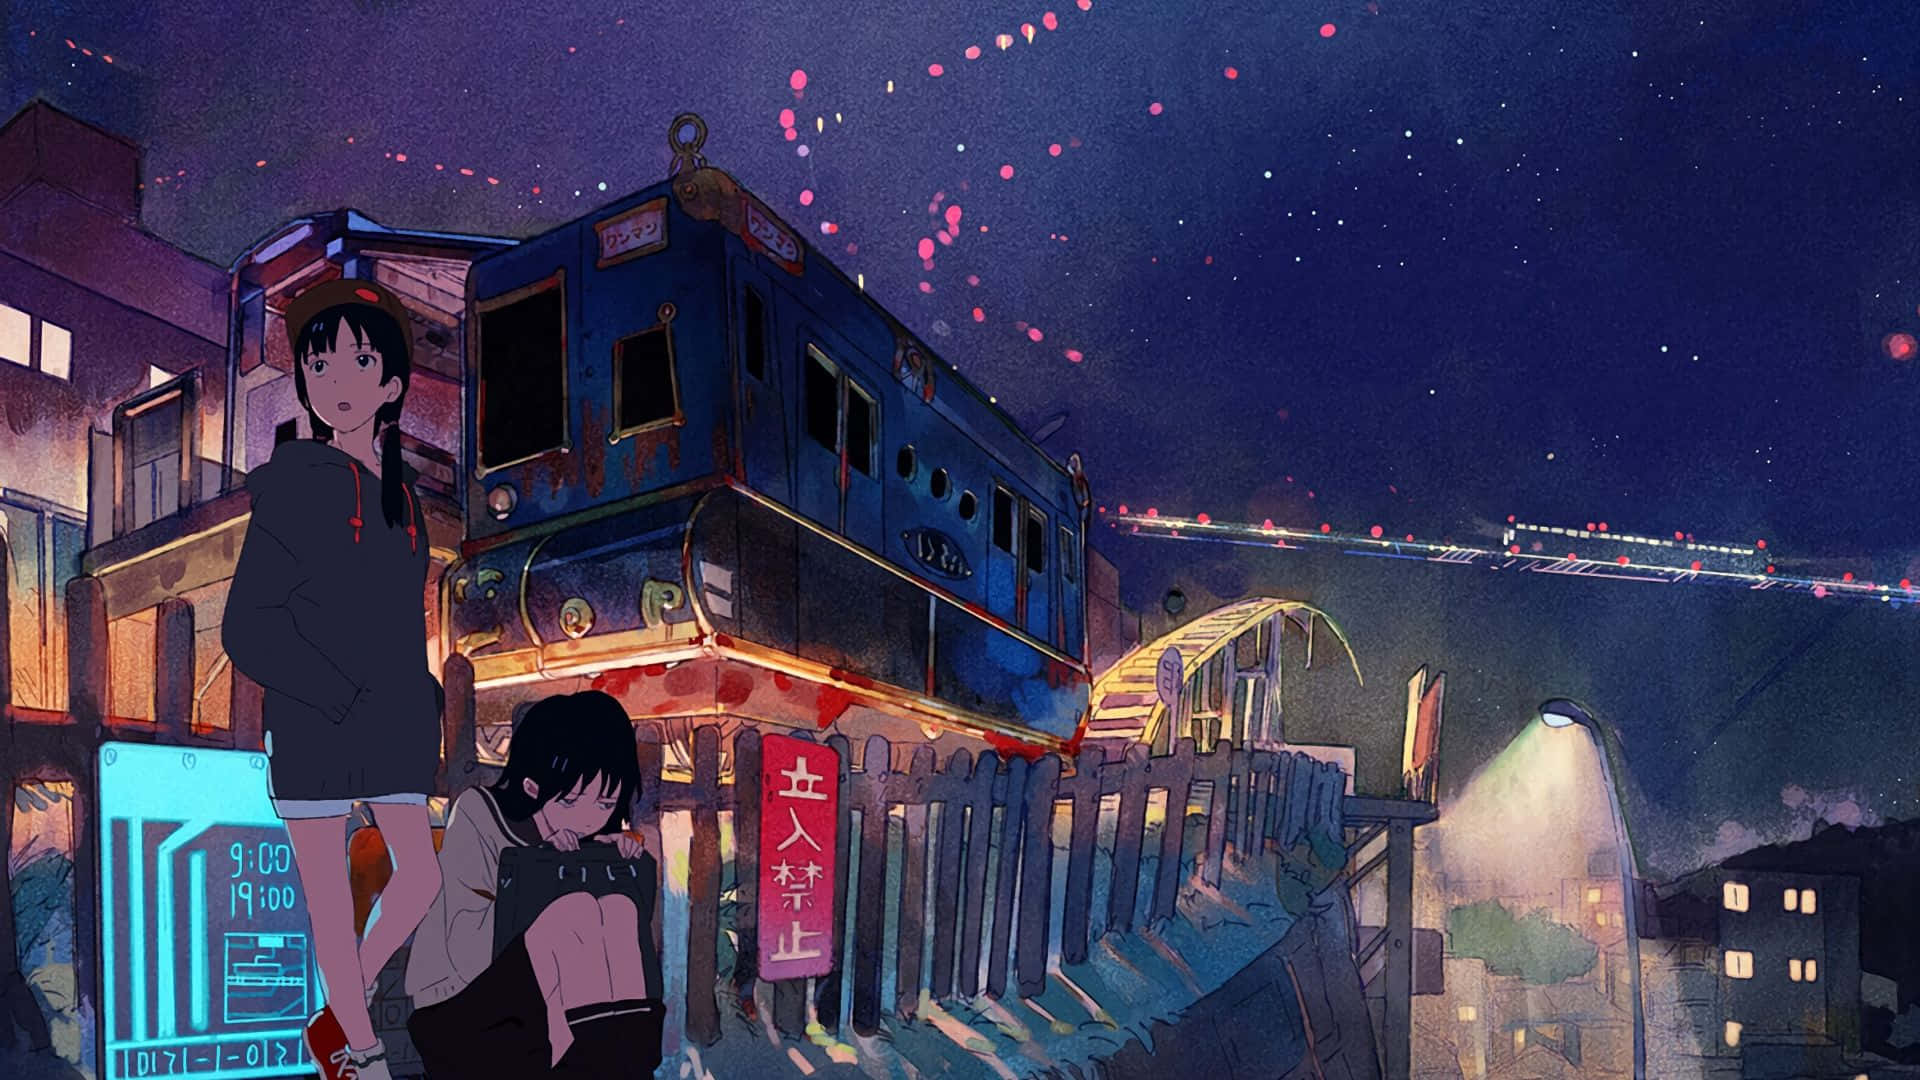 Unwind with Anime Under The Stars Wallpaper